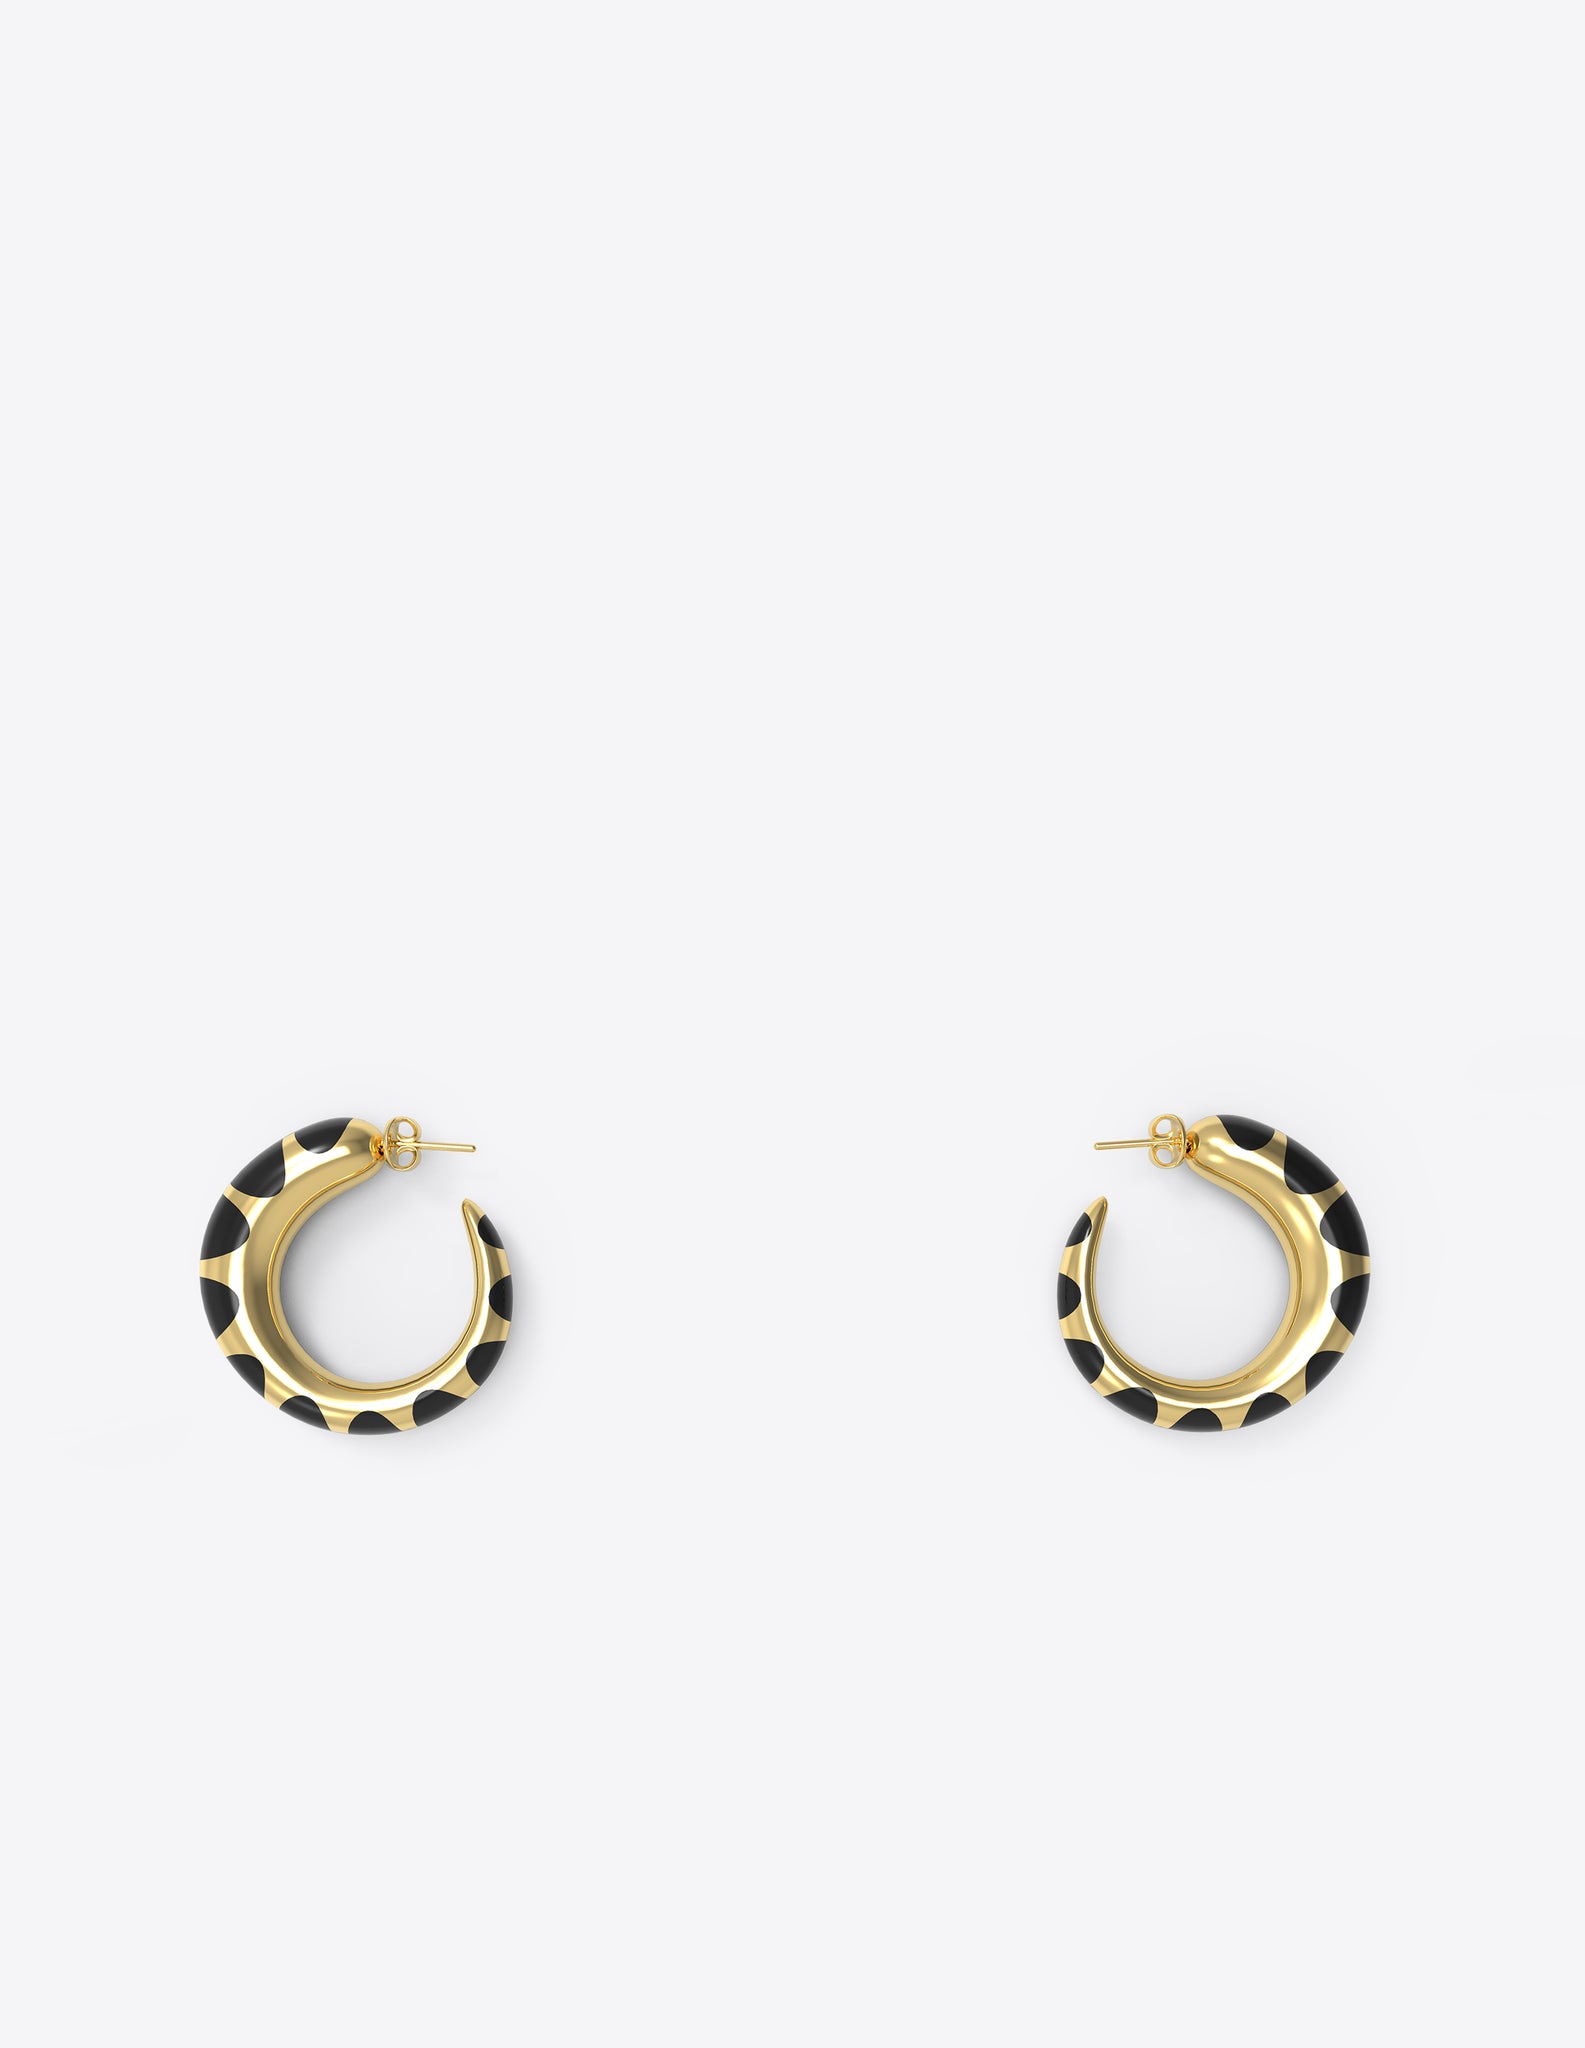 Tiny Khartoum Hoops with Striped Black Onyx Inlay in Gold Vermeil